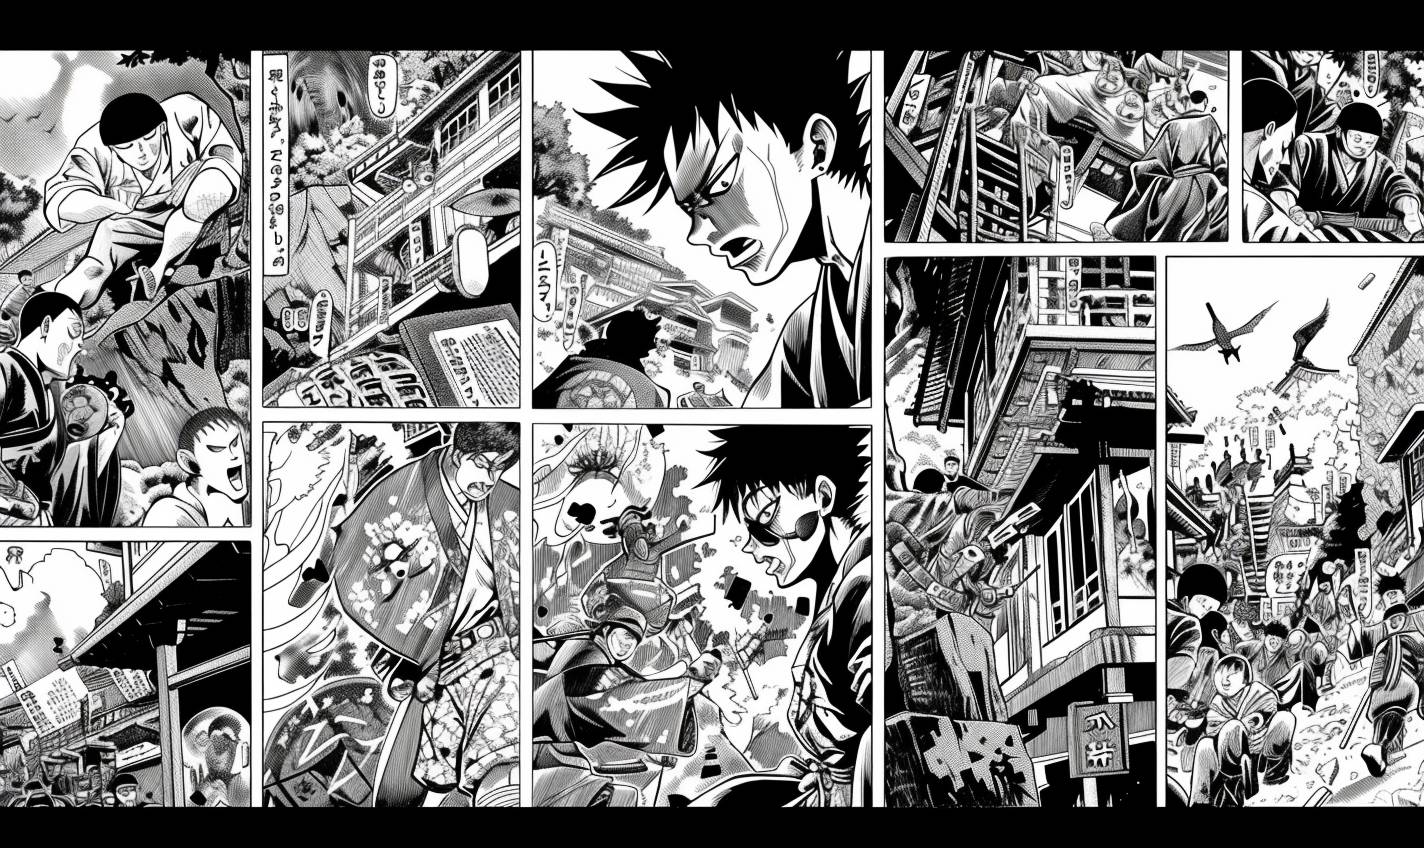 Scan of a Shonen Jump manga page, the panels show scenes of [character description and color element], a black and white vintage Japanese comic.